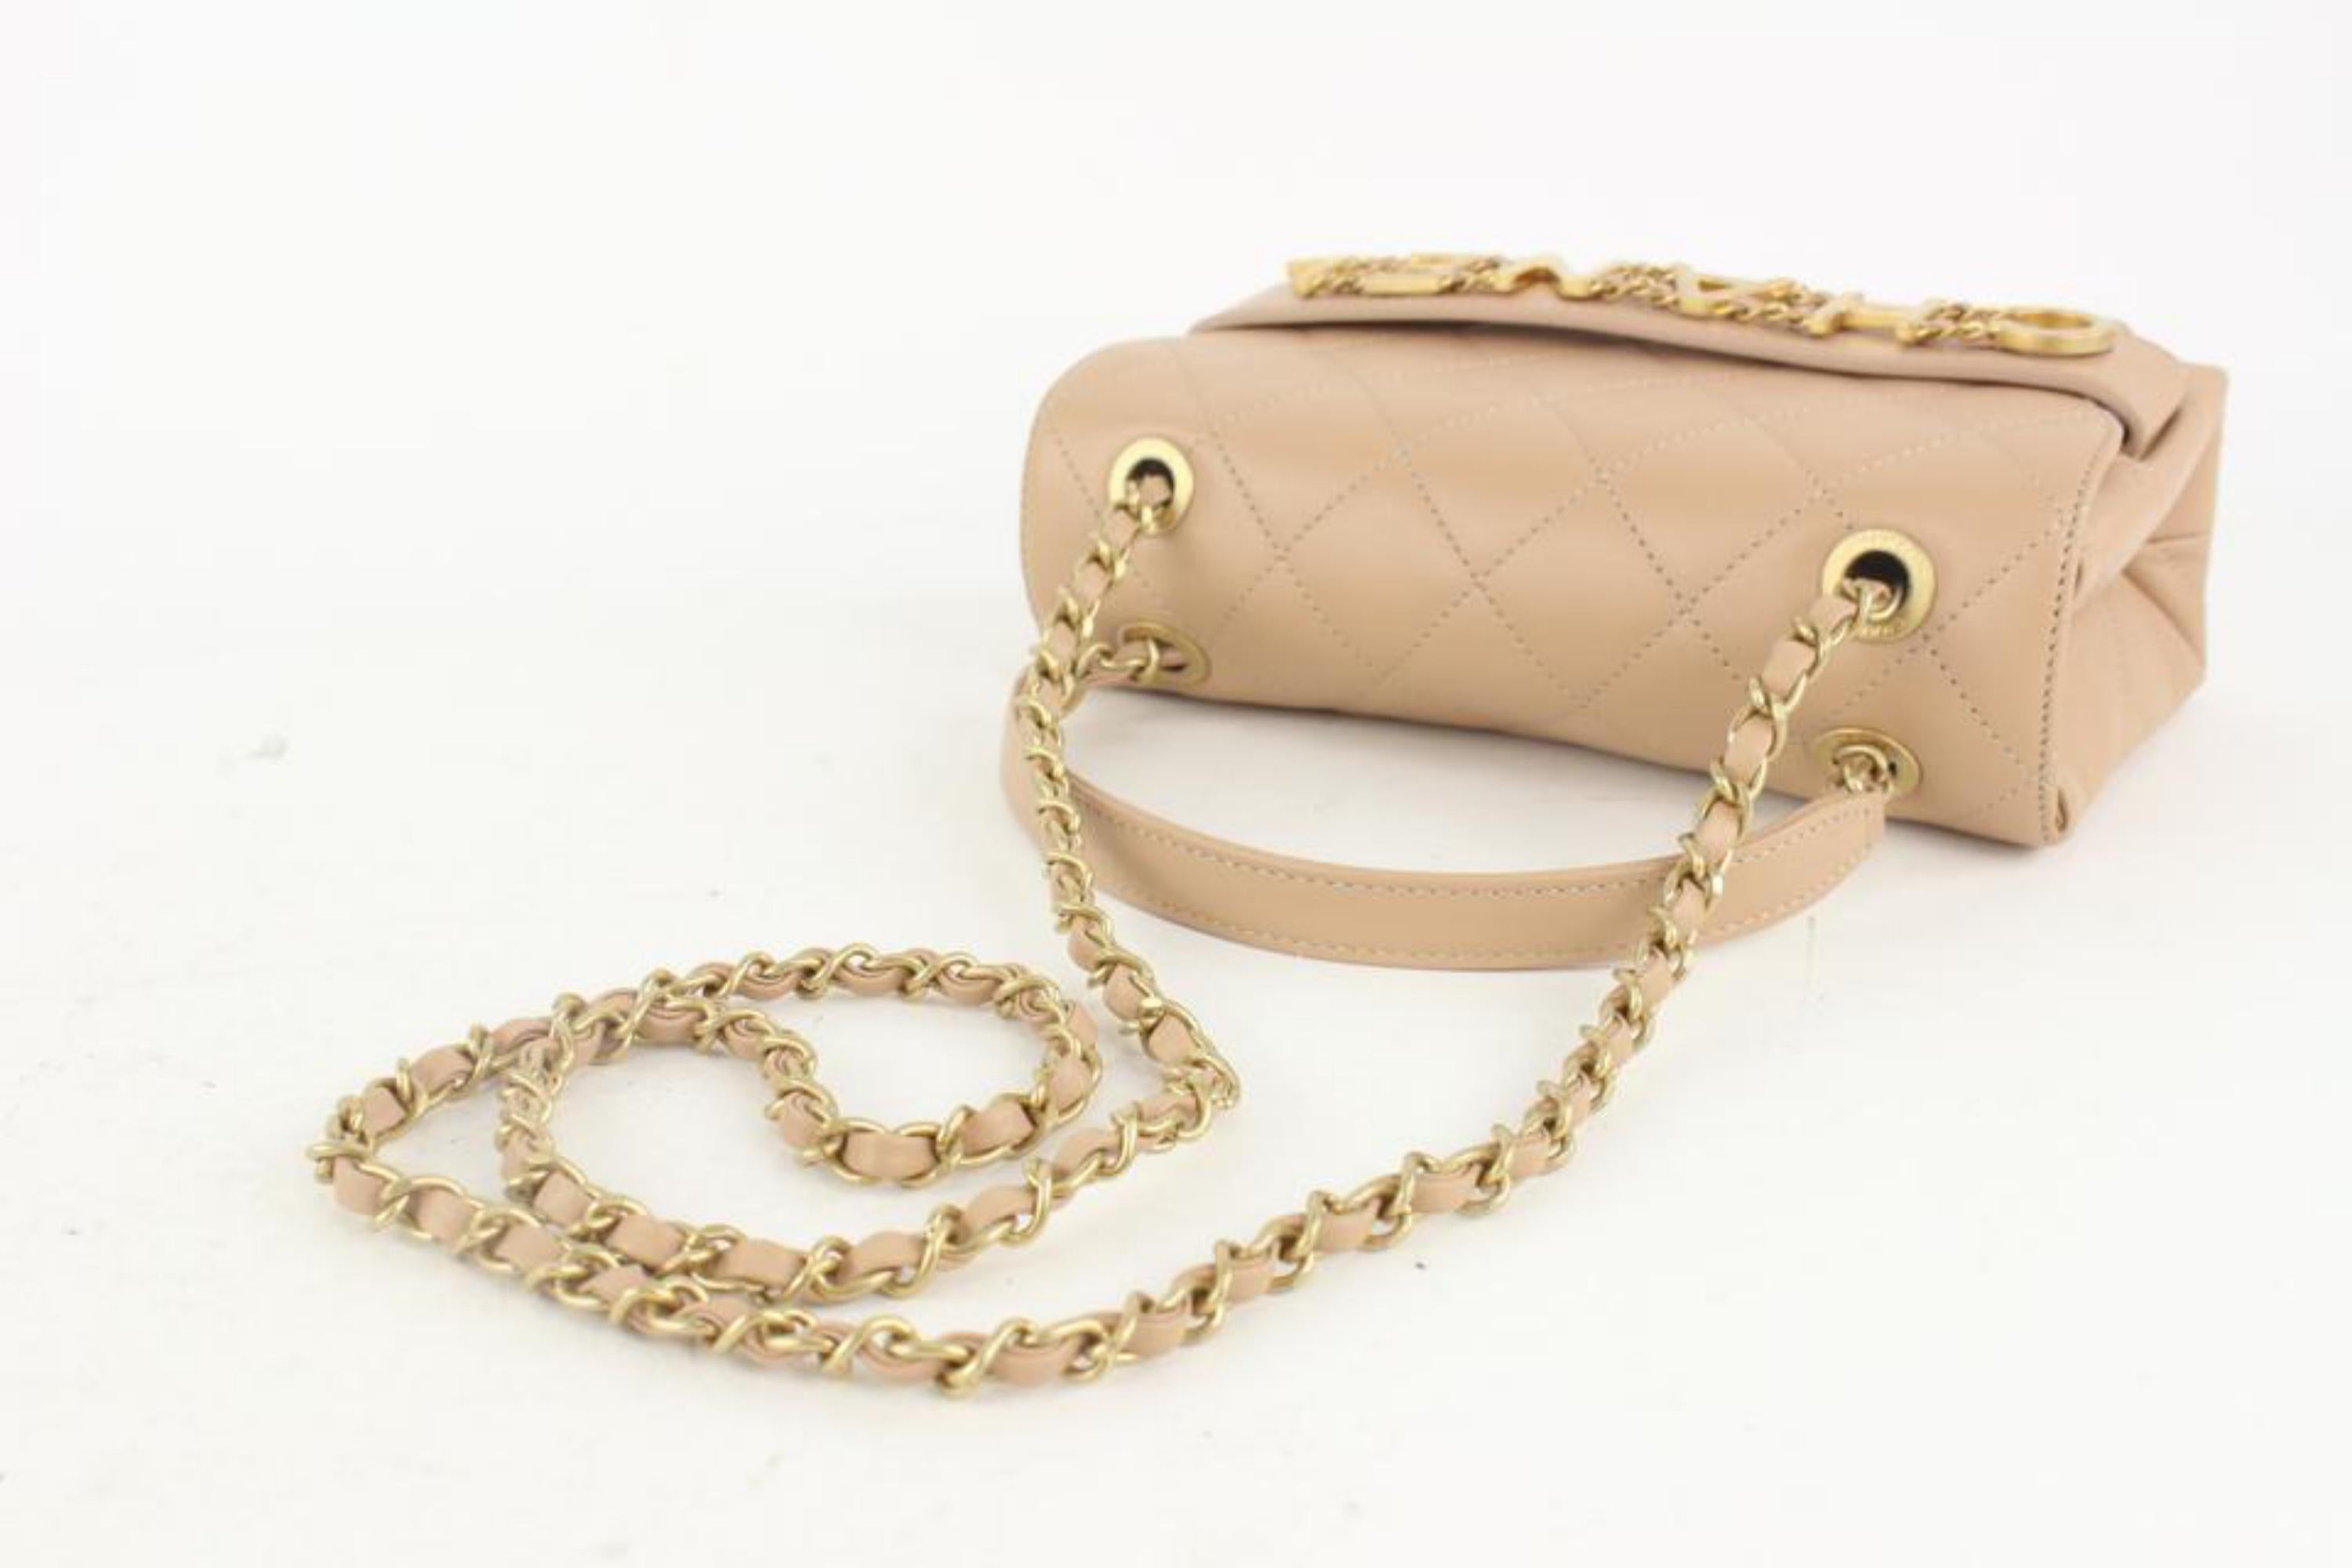 Chanel Quilted Beige Leather Enchained Top Handle Crossbody Flap Bag 1111C27 For Sale 2